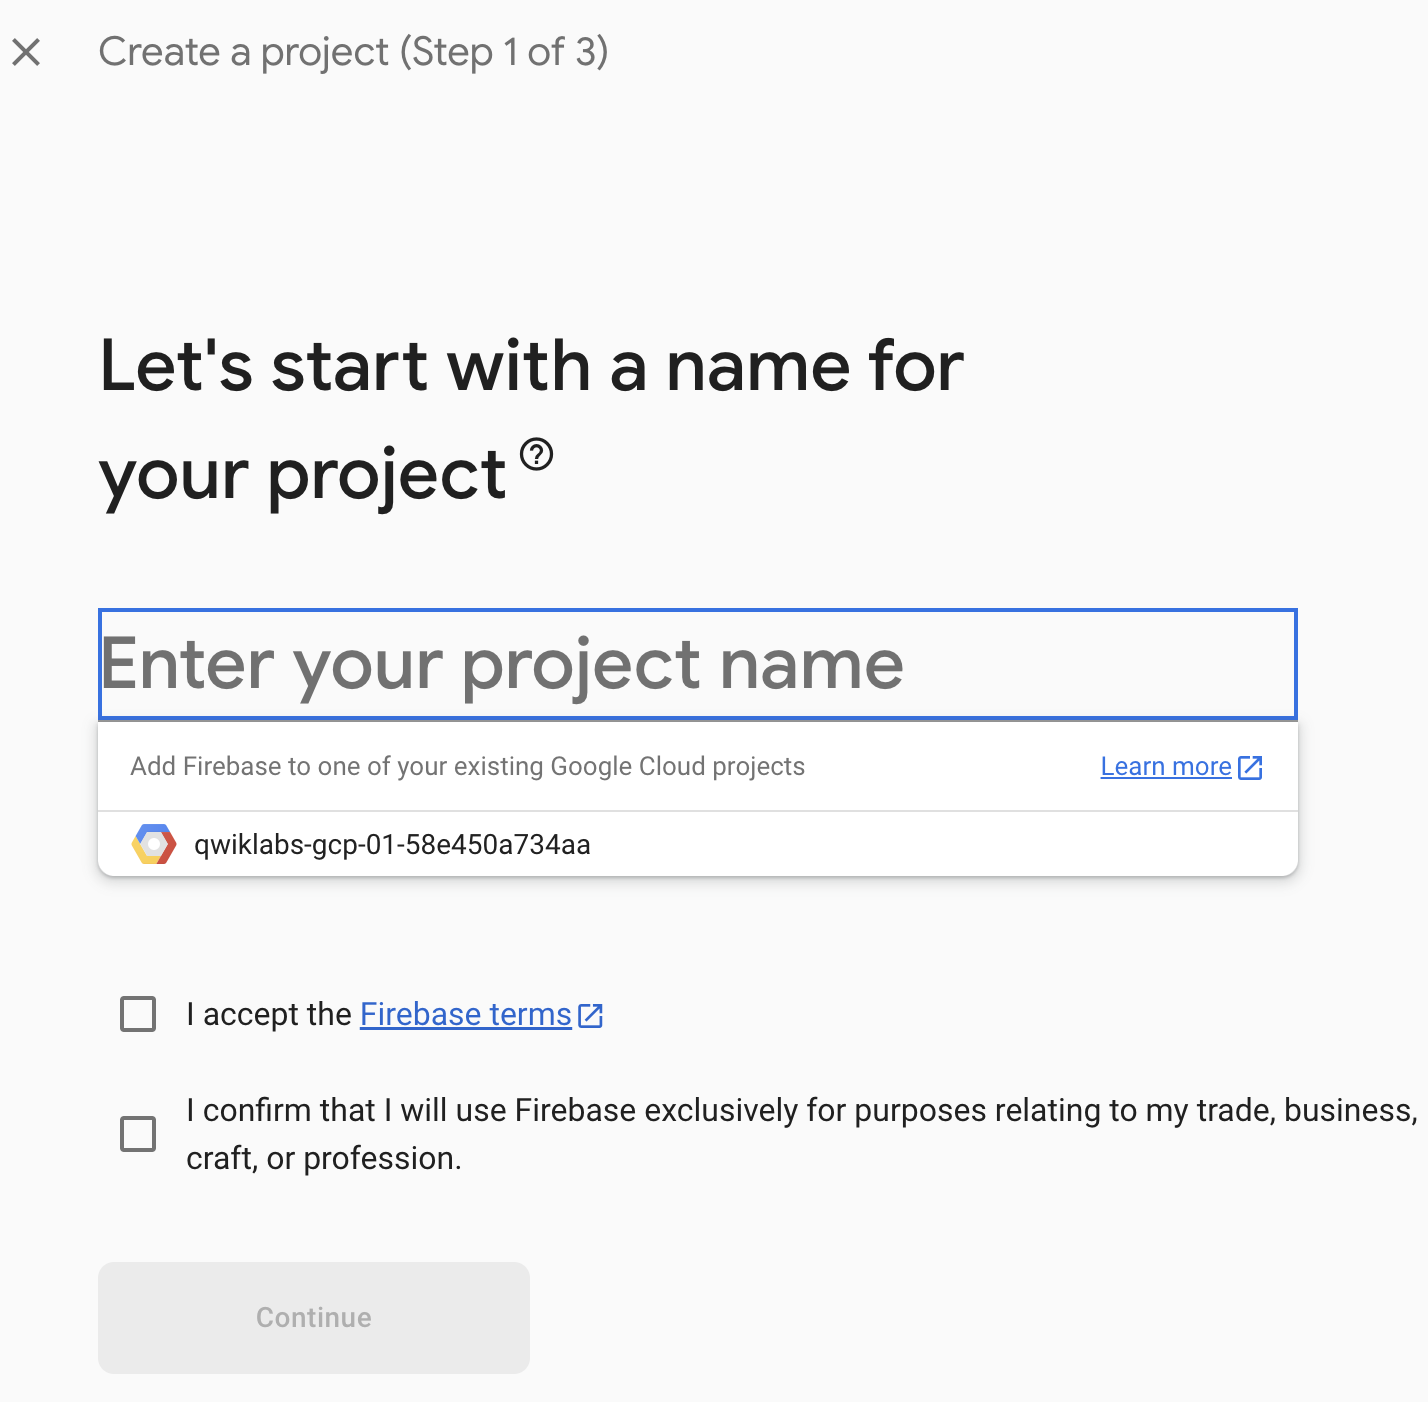 Enter your project name field